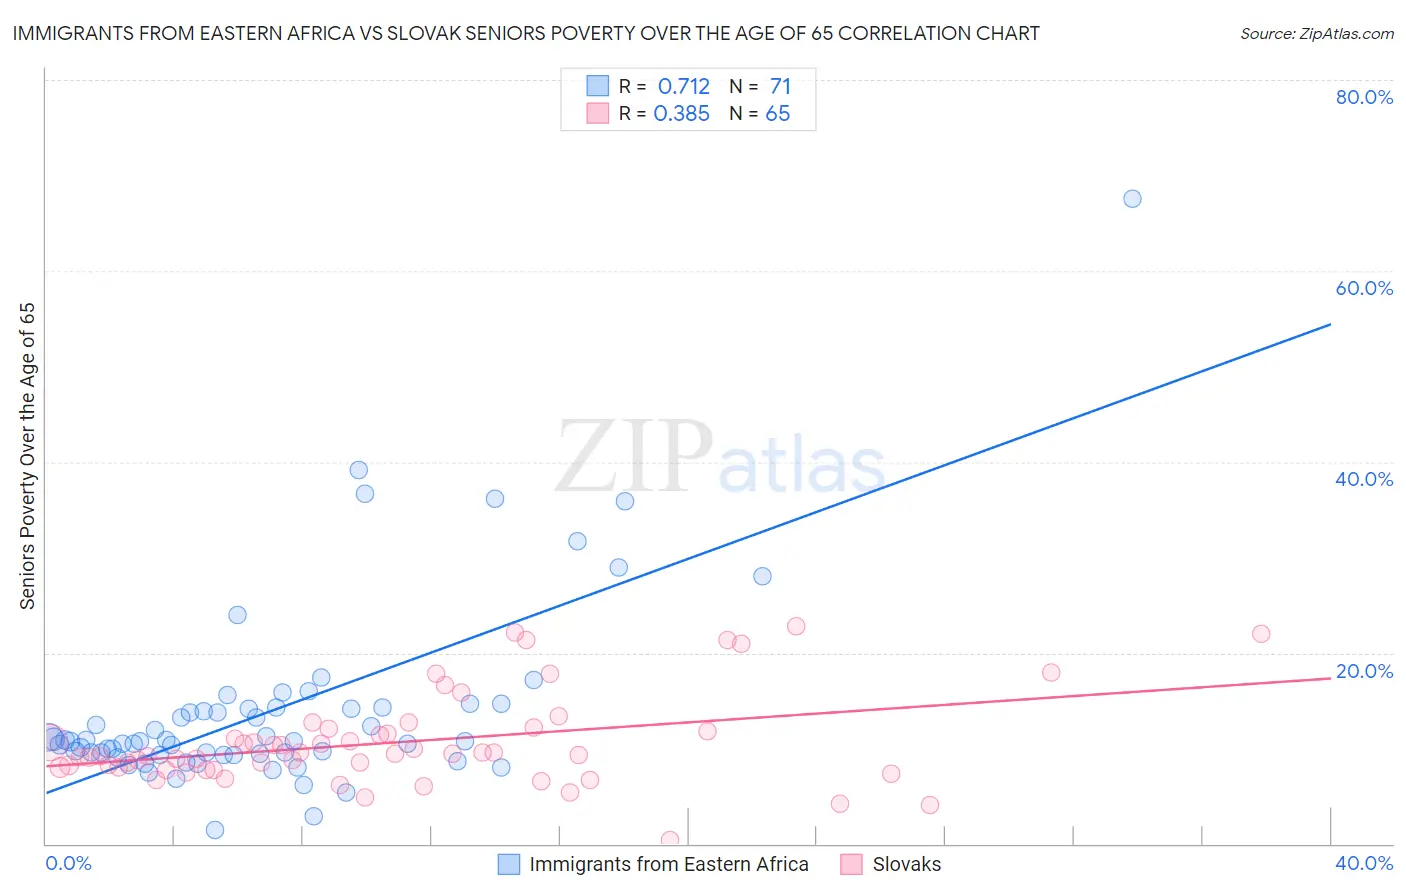 Immigrants from Eastern Africa vs Slovak Seniors Poverty Over the Age of 65